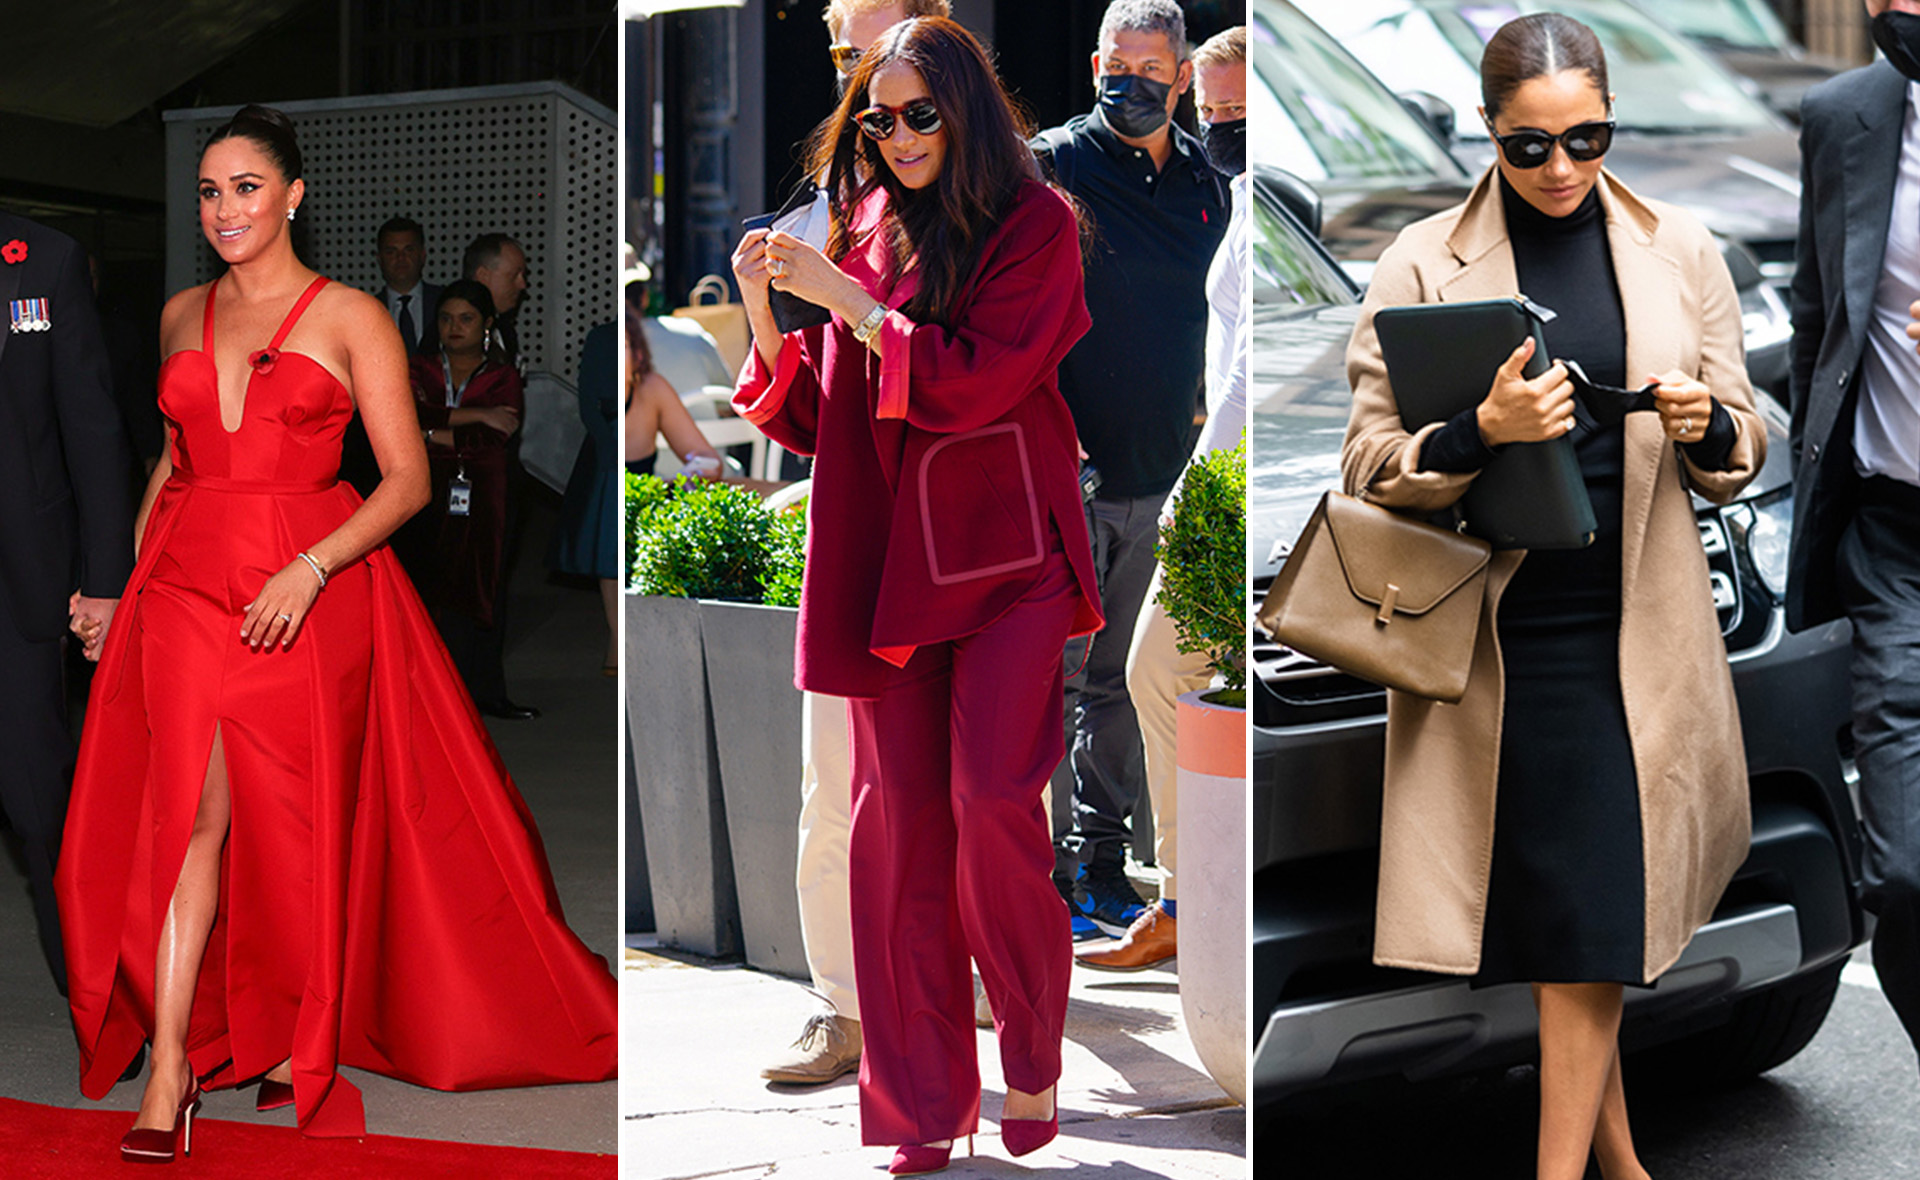 She never misses the Mark-le! Meghan, Duchess of Sussex’s best fashion looks of 2021